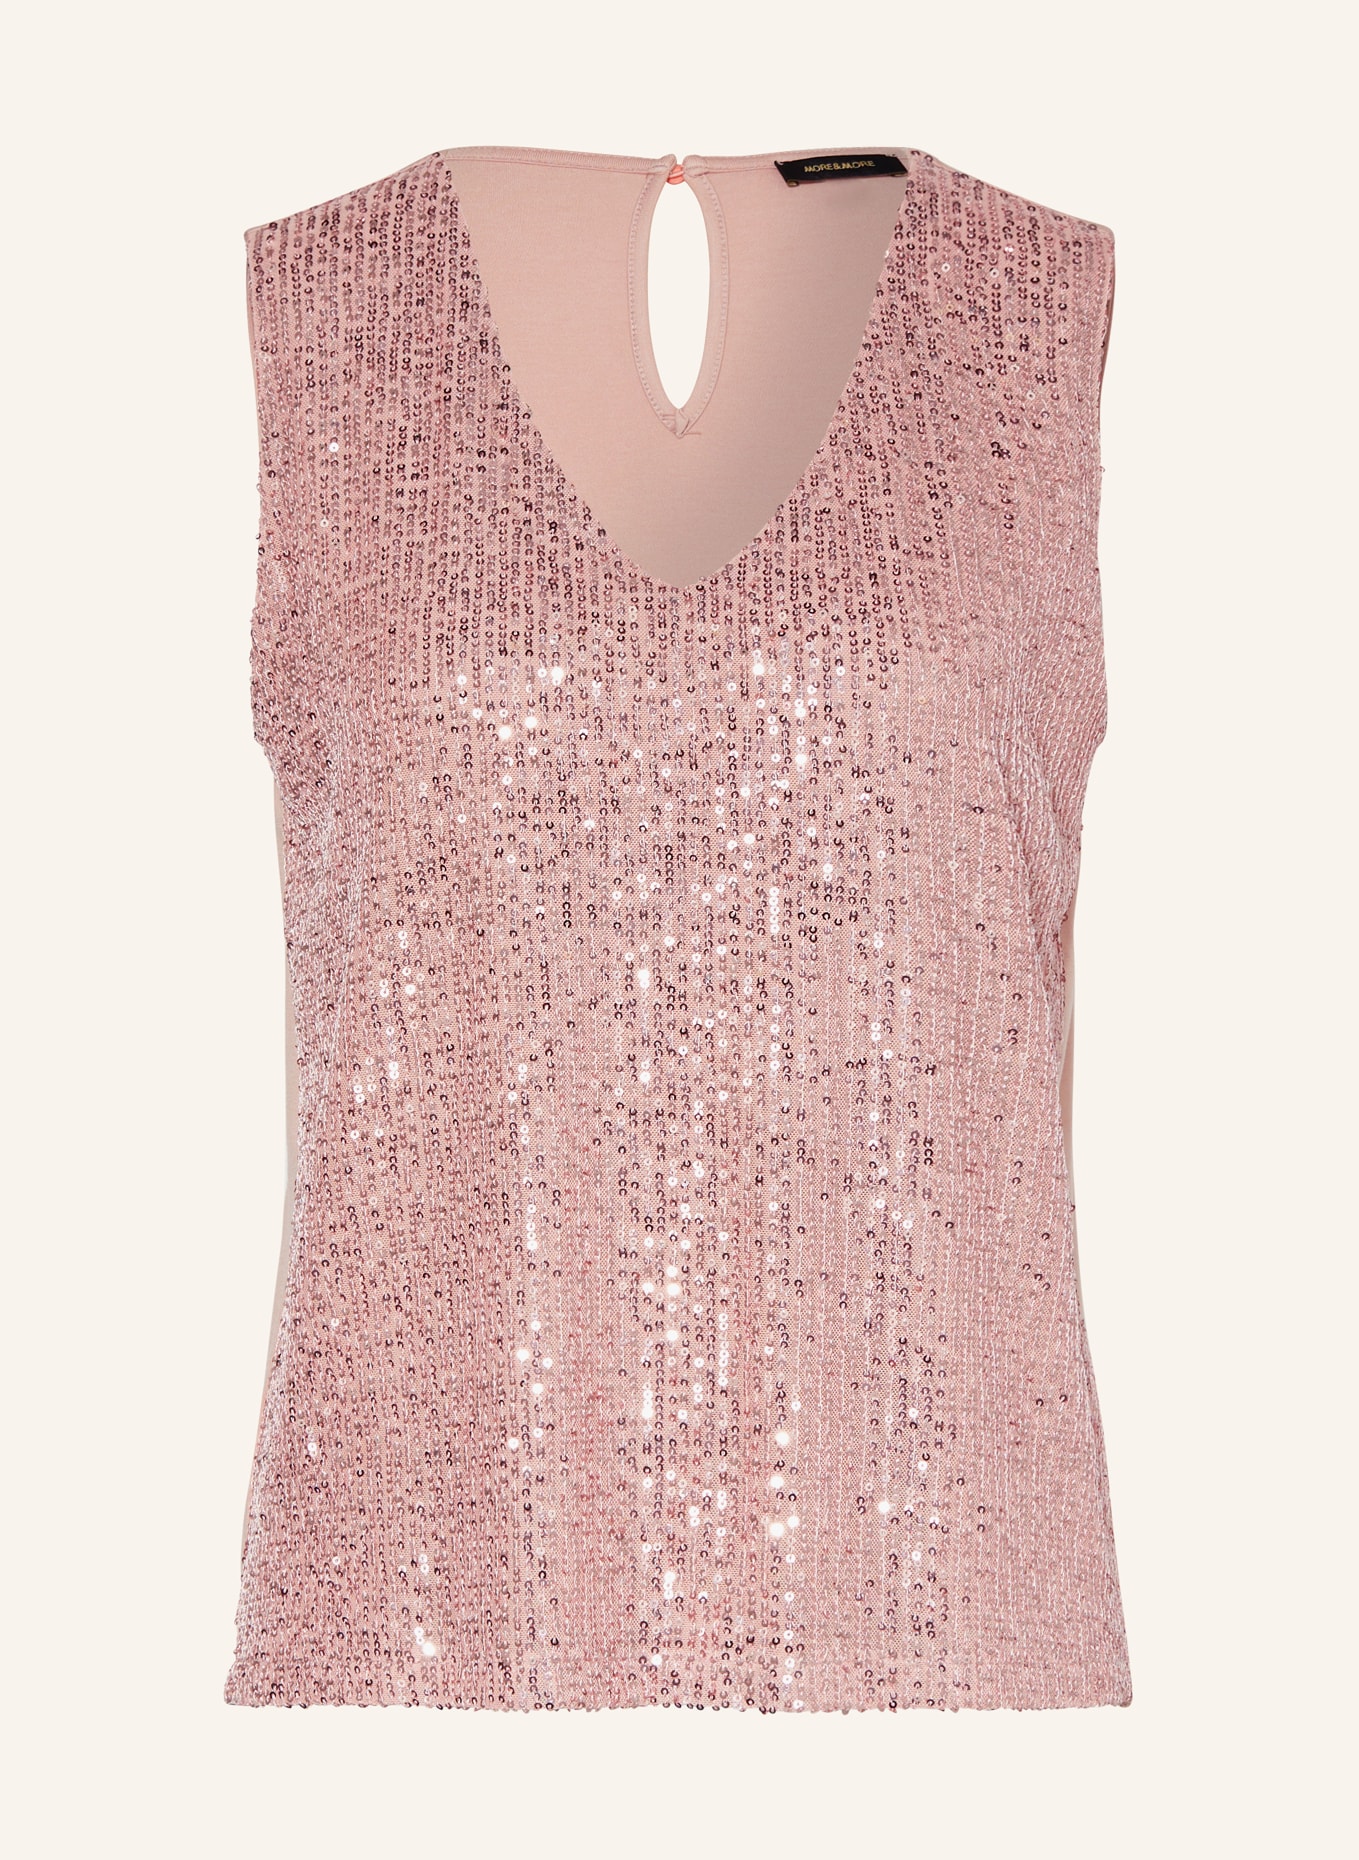 MORE & MORE Top with sequins, Color: 0814 powder rose (Image 1)